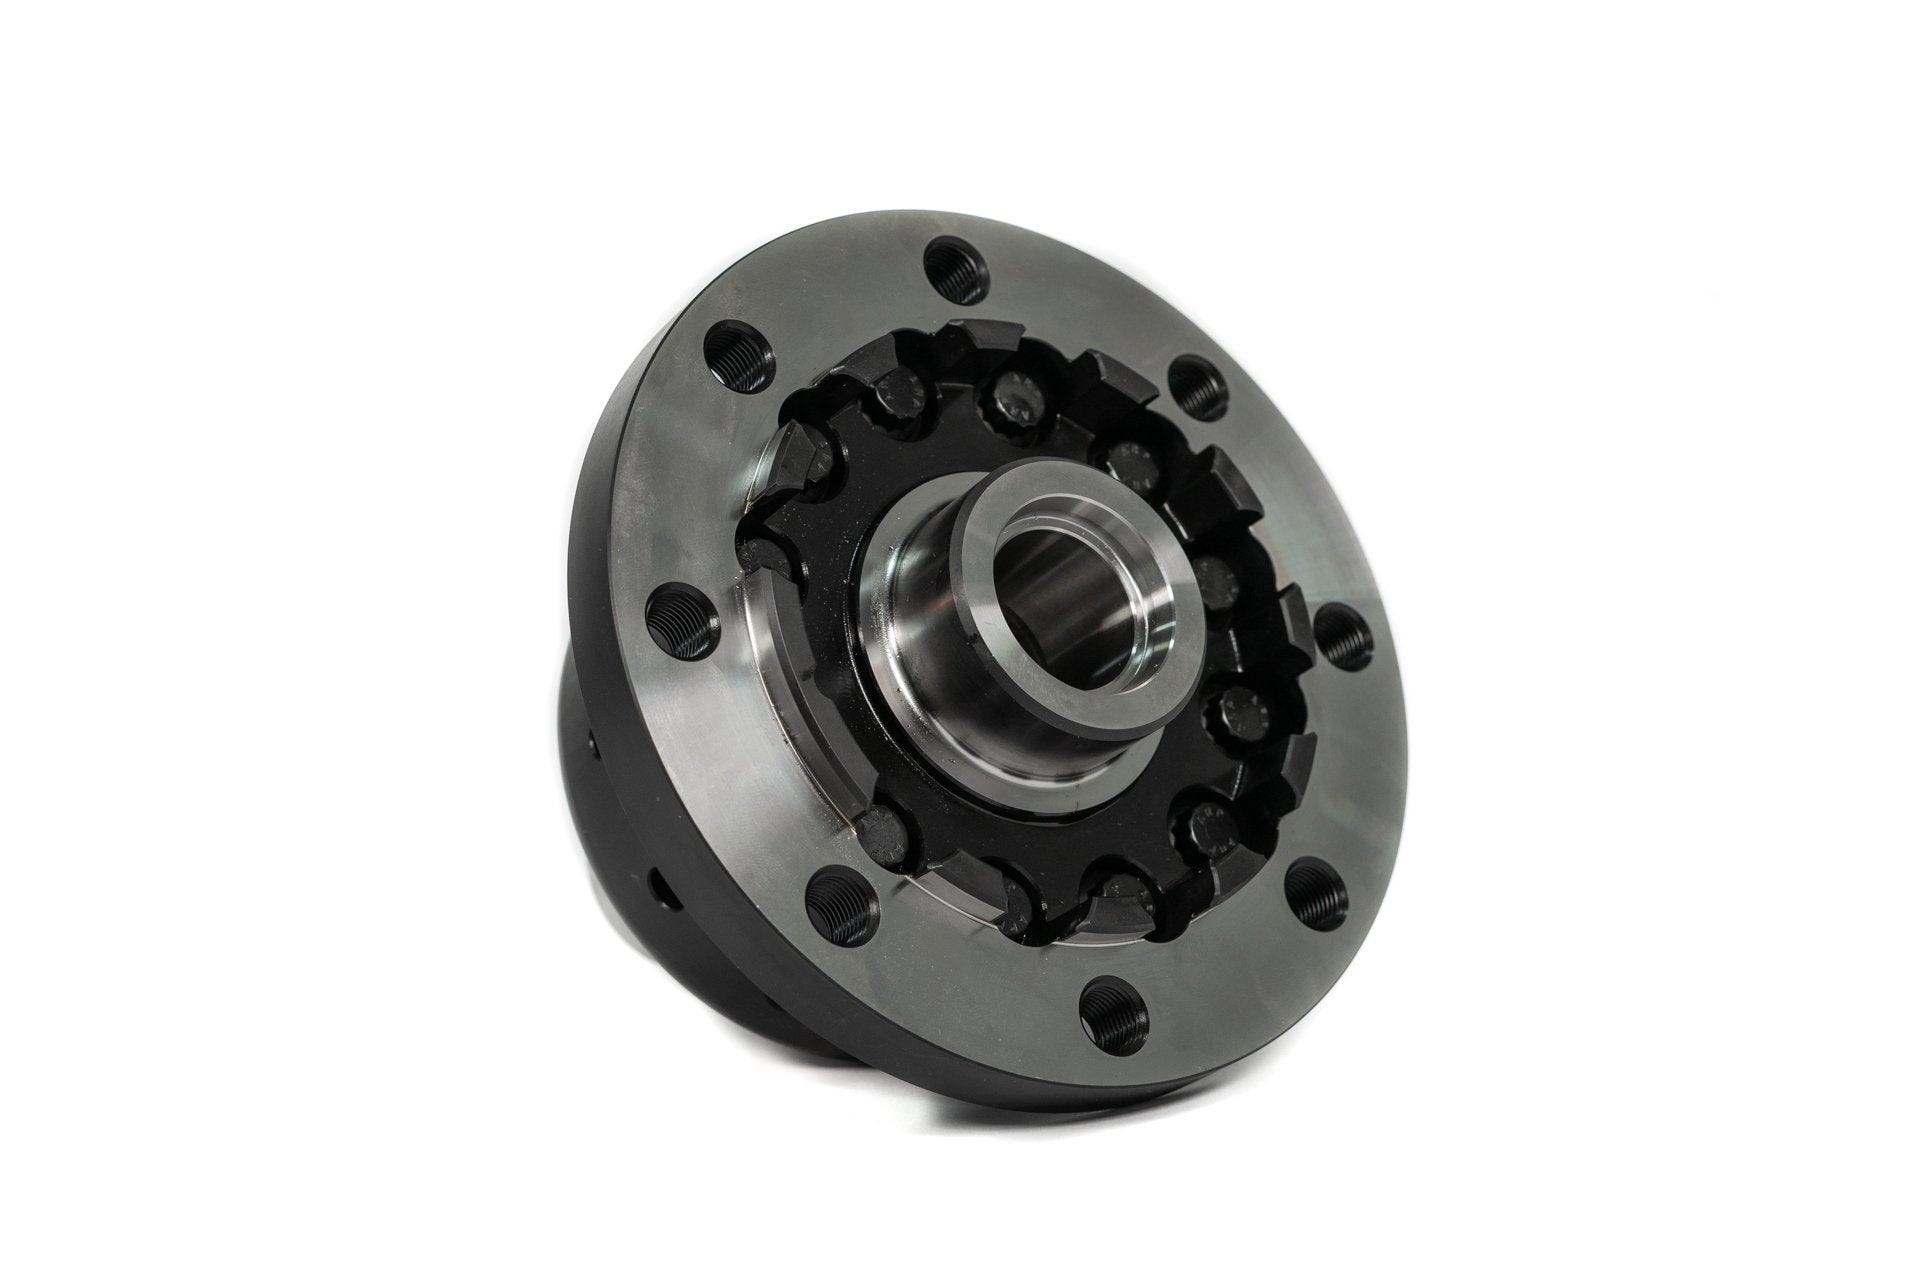 Wavetrac ATB Helical Limited Slip Differential - VW 0AM DQ200 - 7 Speed Dry Clutch DSG - 6C Polo Gti - VW Golf 1.4TSi & More!